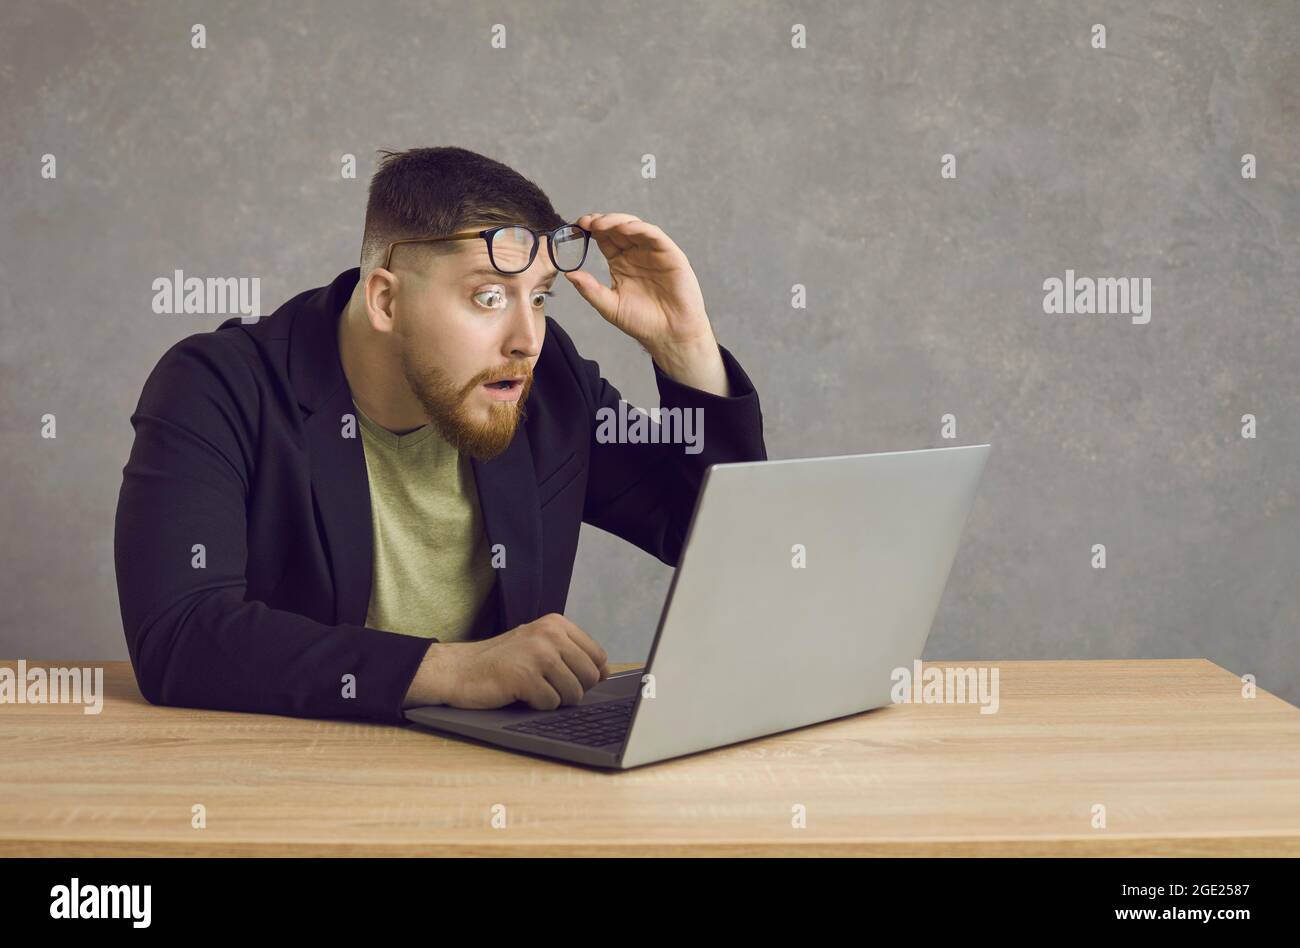 Young man is shocked while teleworking. Stock Photo